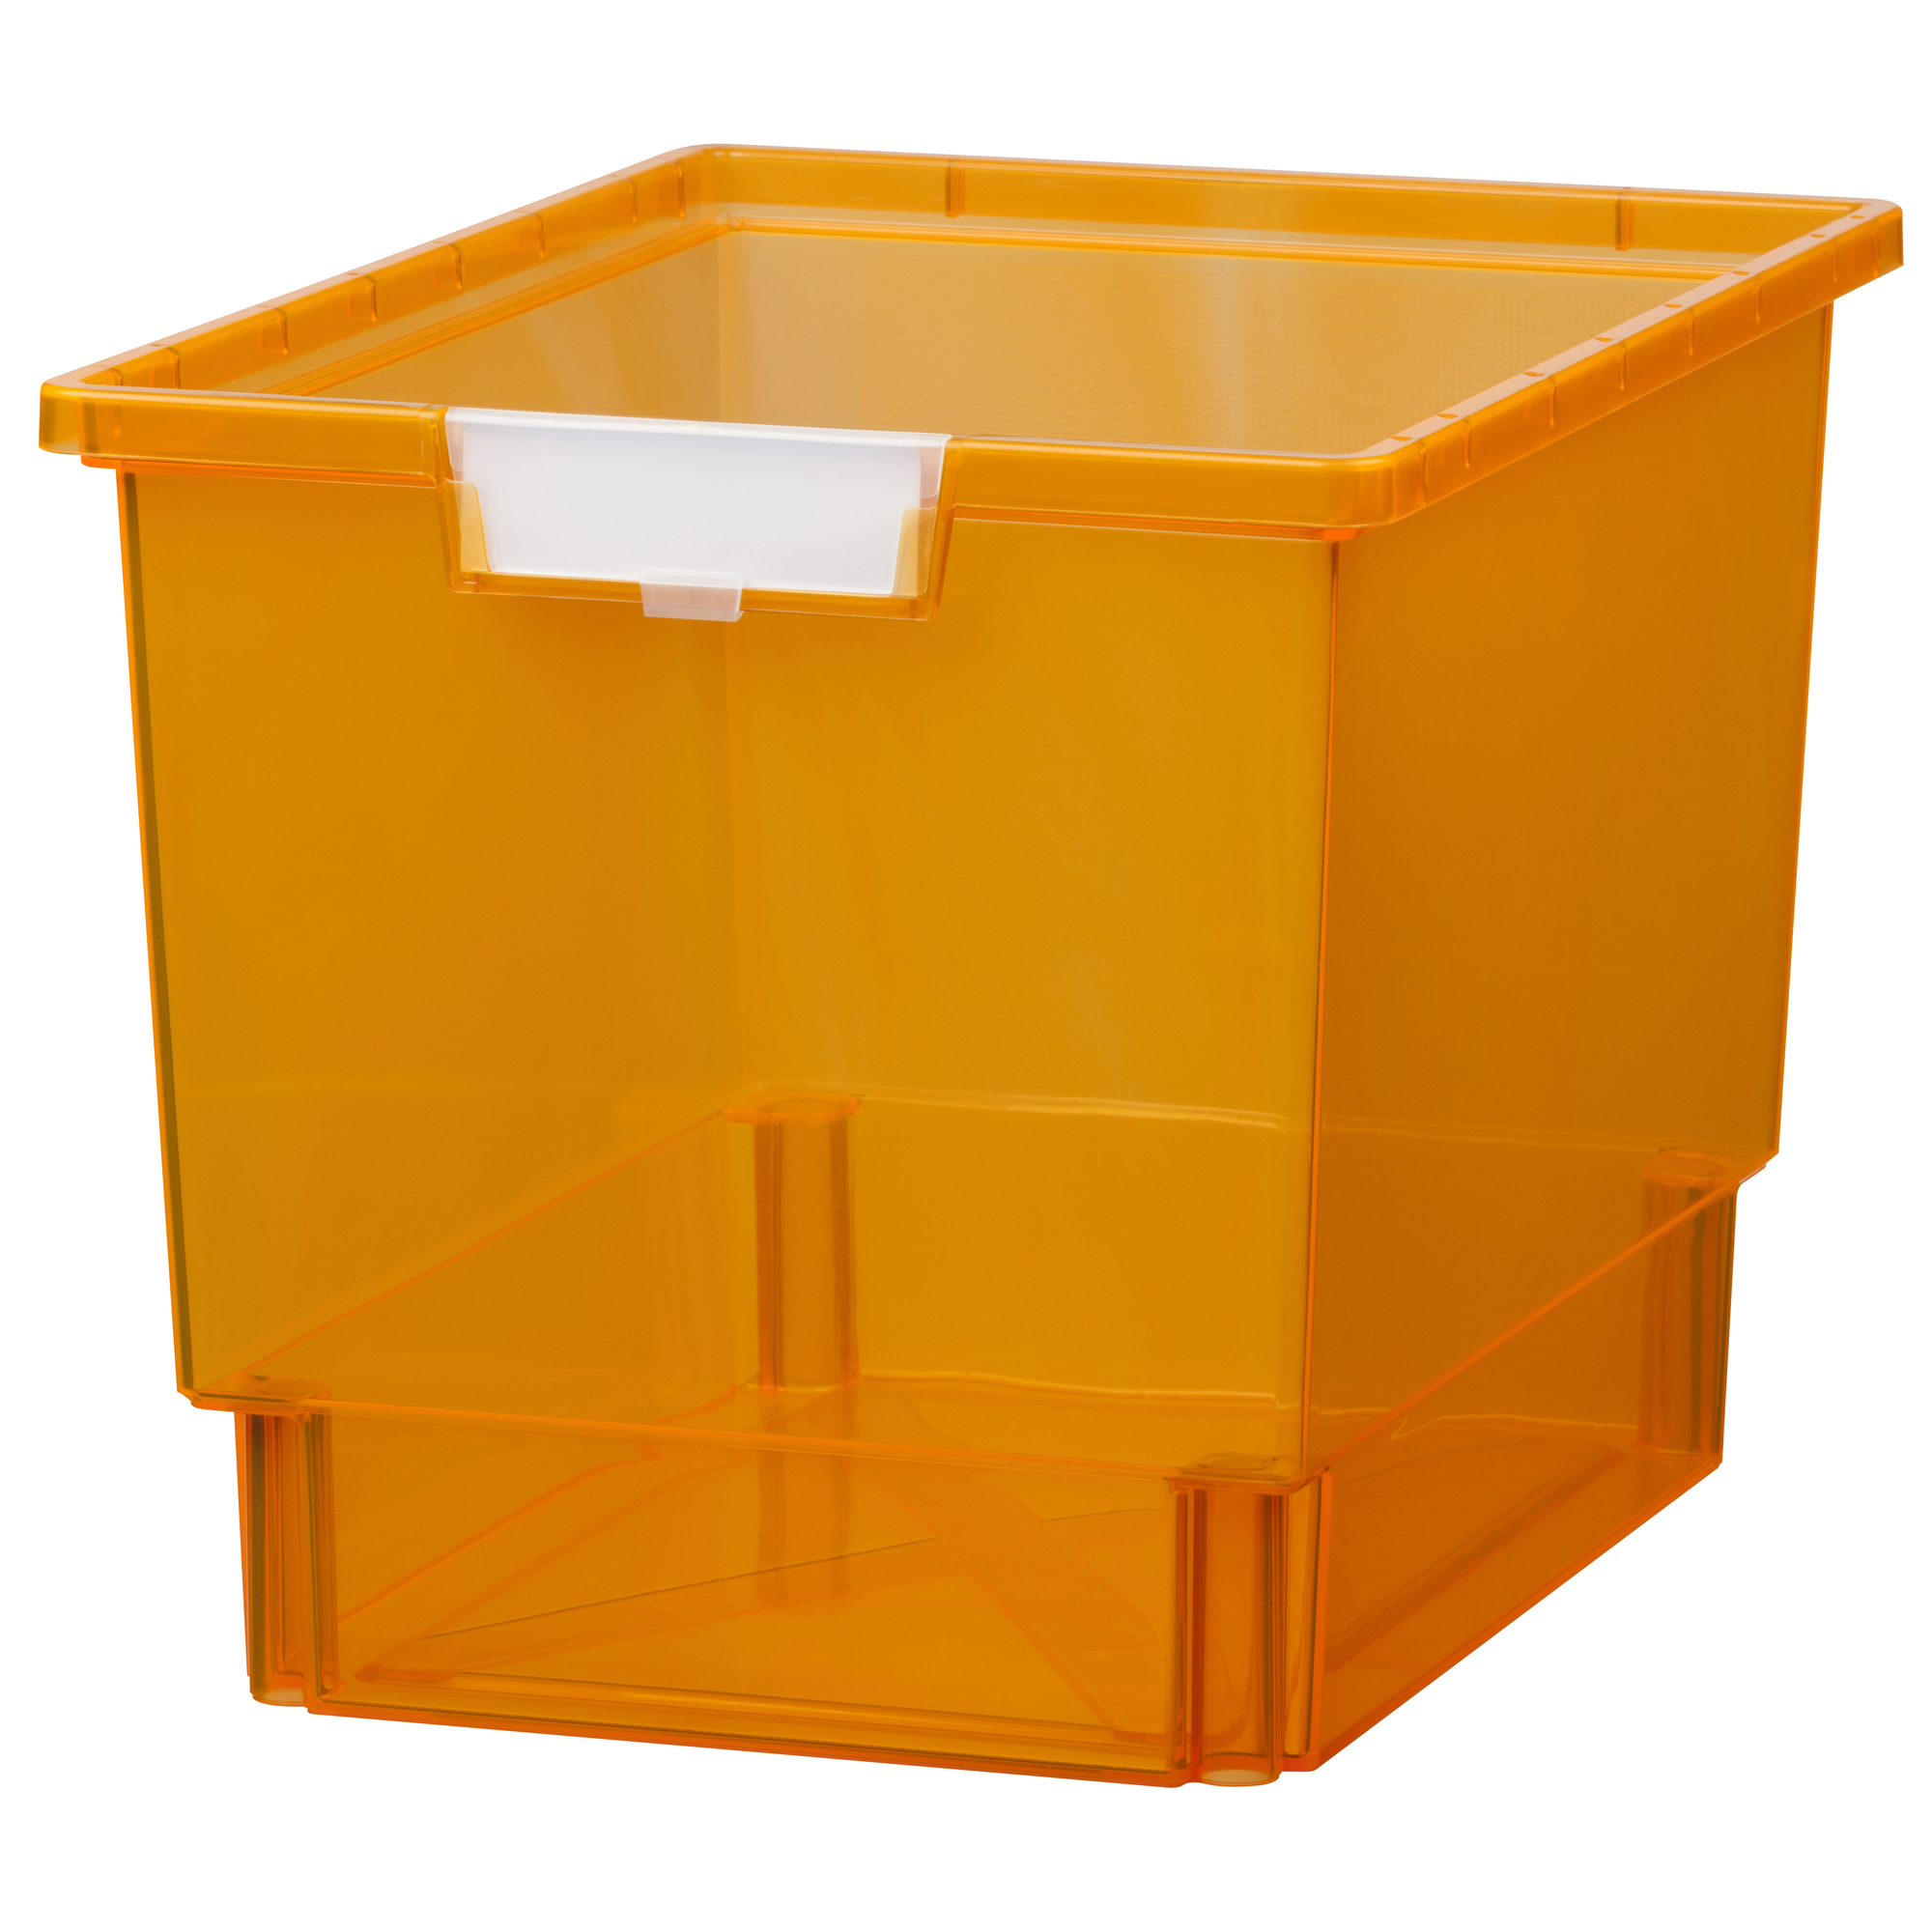 Certwood StorWerks, Slim Line 12Inch Tray in Neon Orange - 3 Pack, Included (qty.) 3, Material Plastic, Height 9 in, Model CE1954FO3